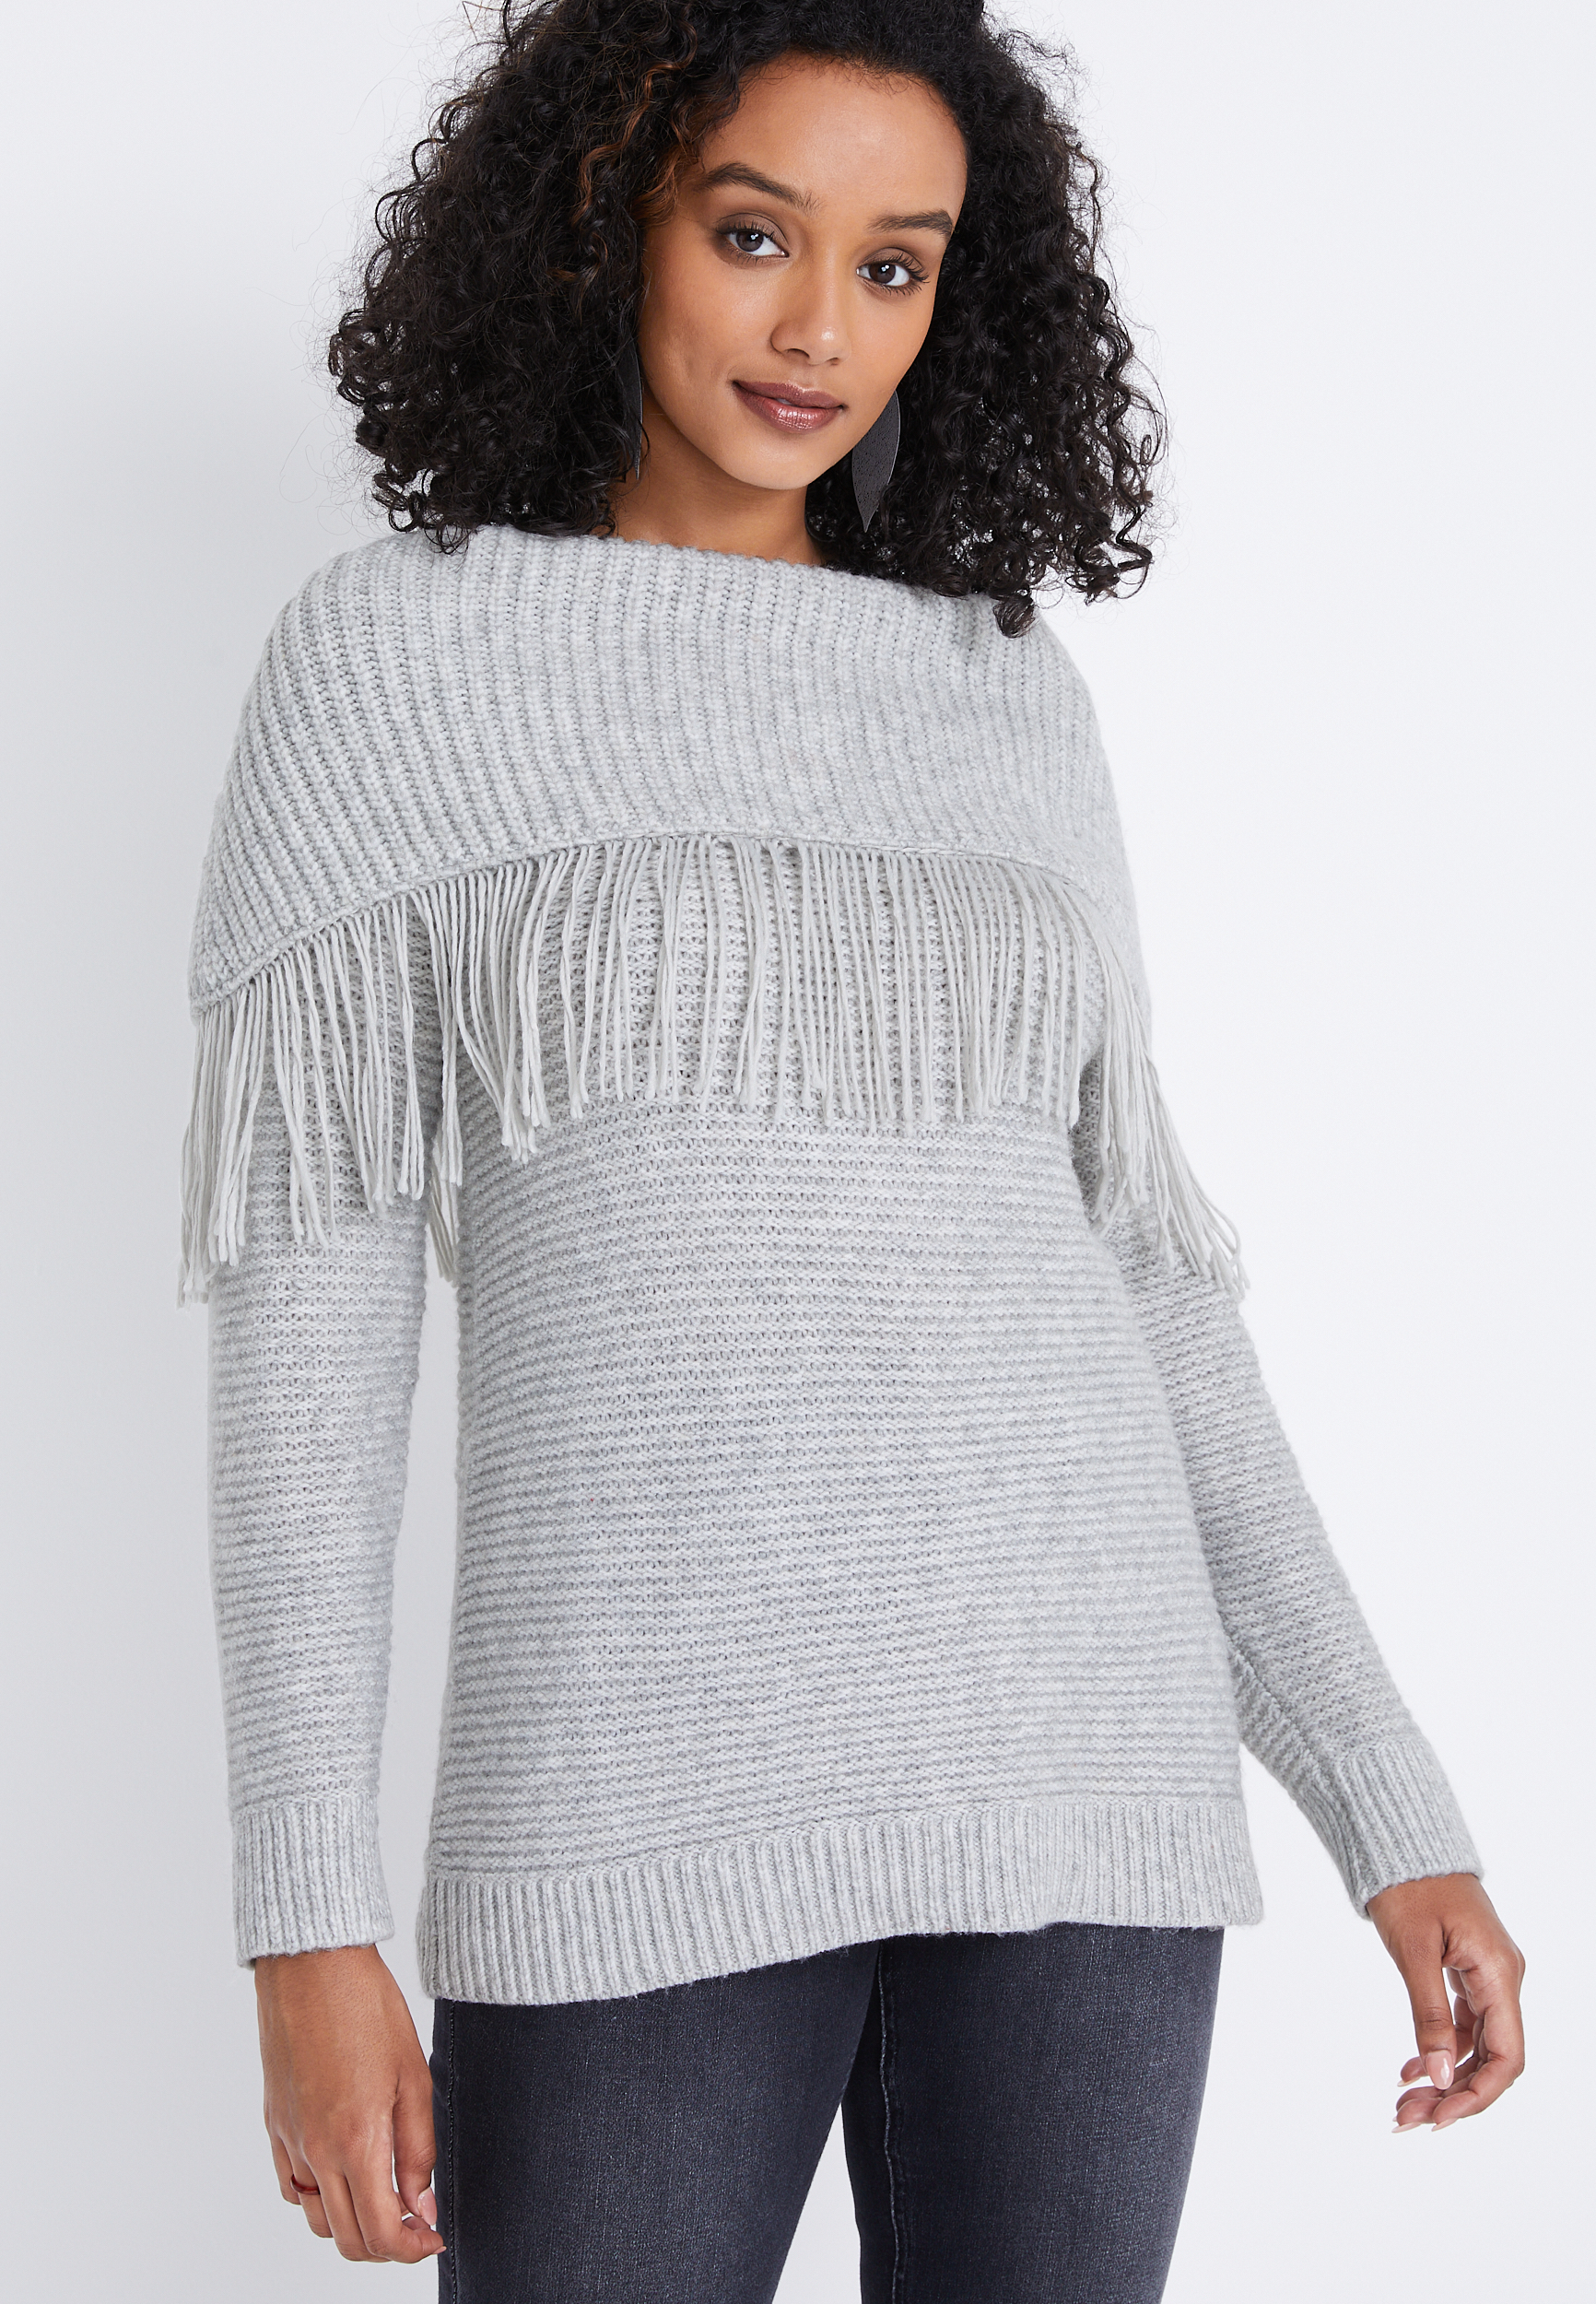 Cowl Neck Fringe Sweater | maurices